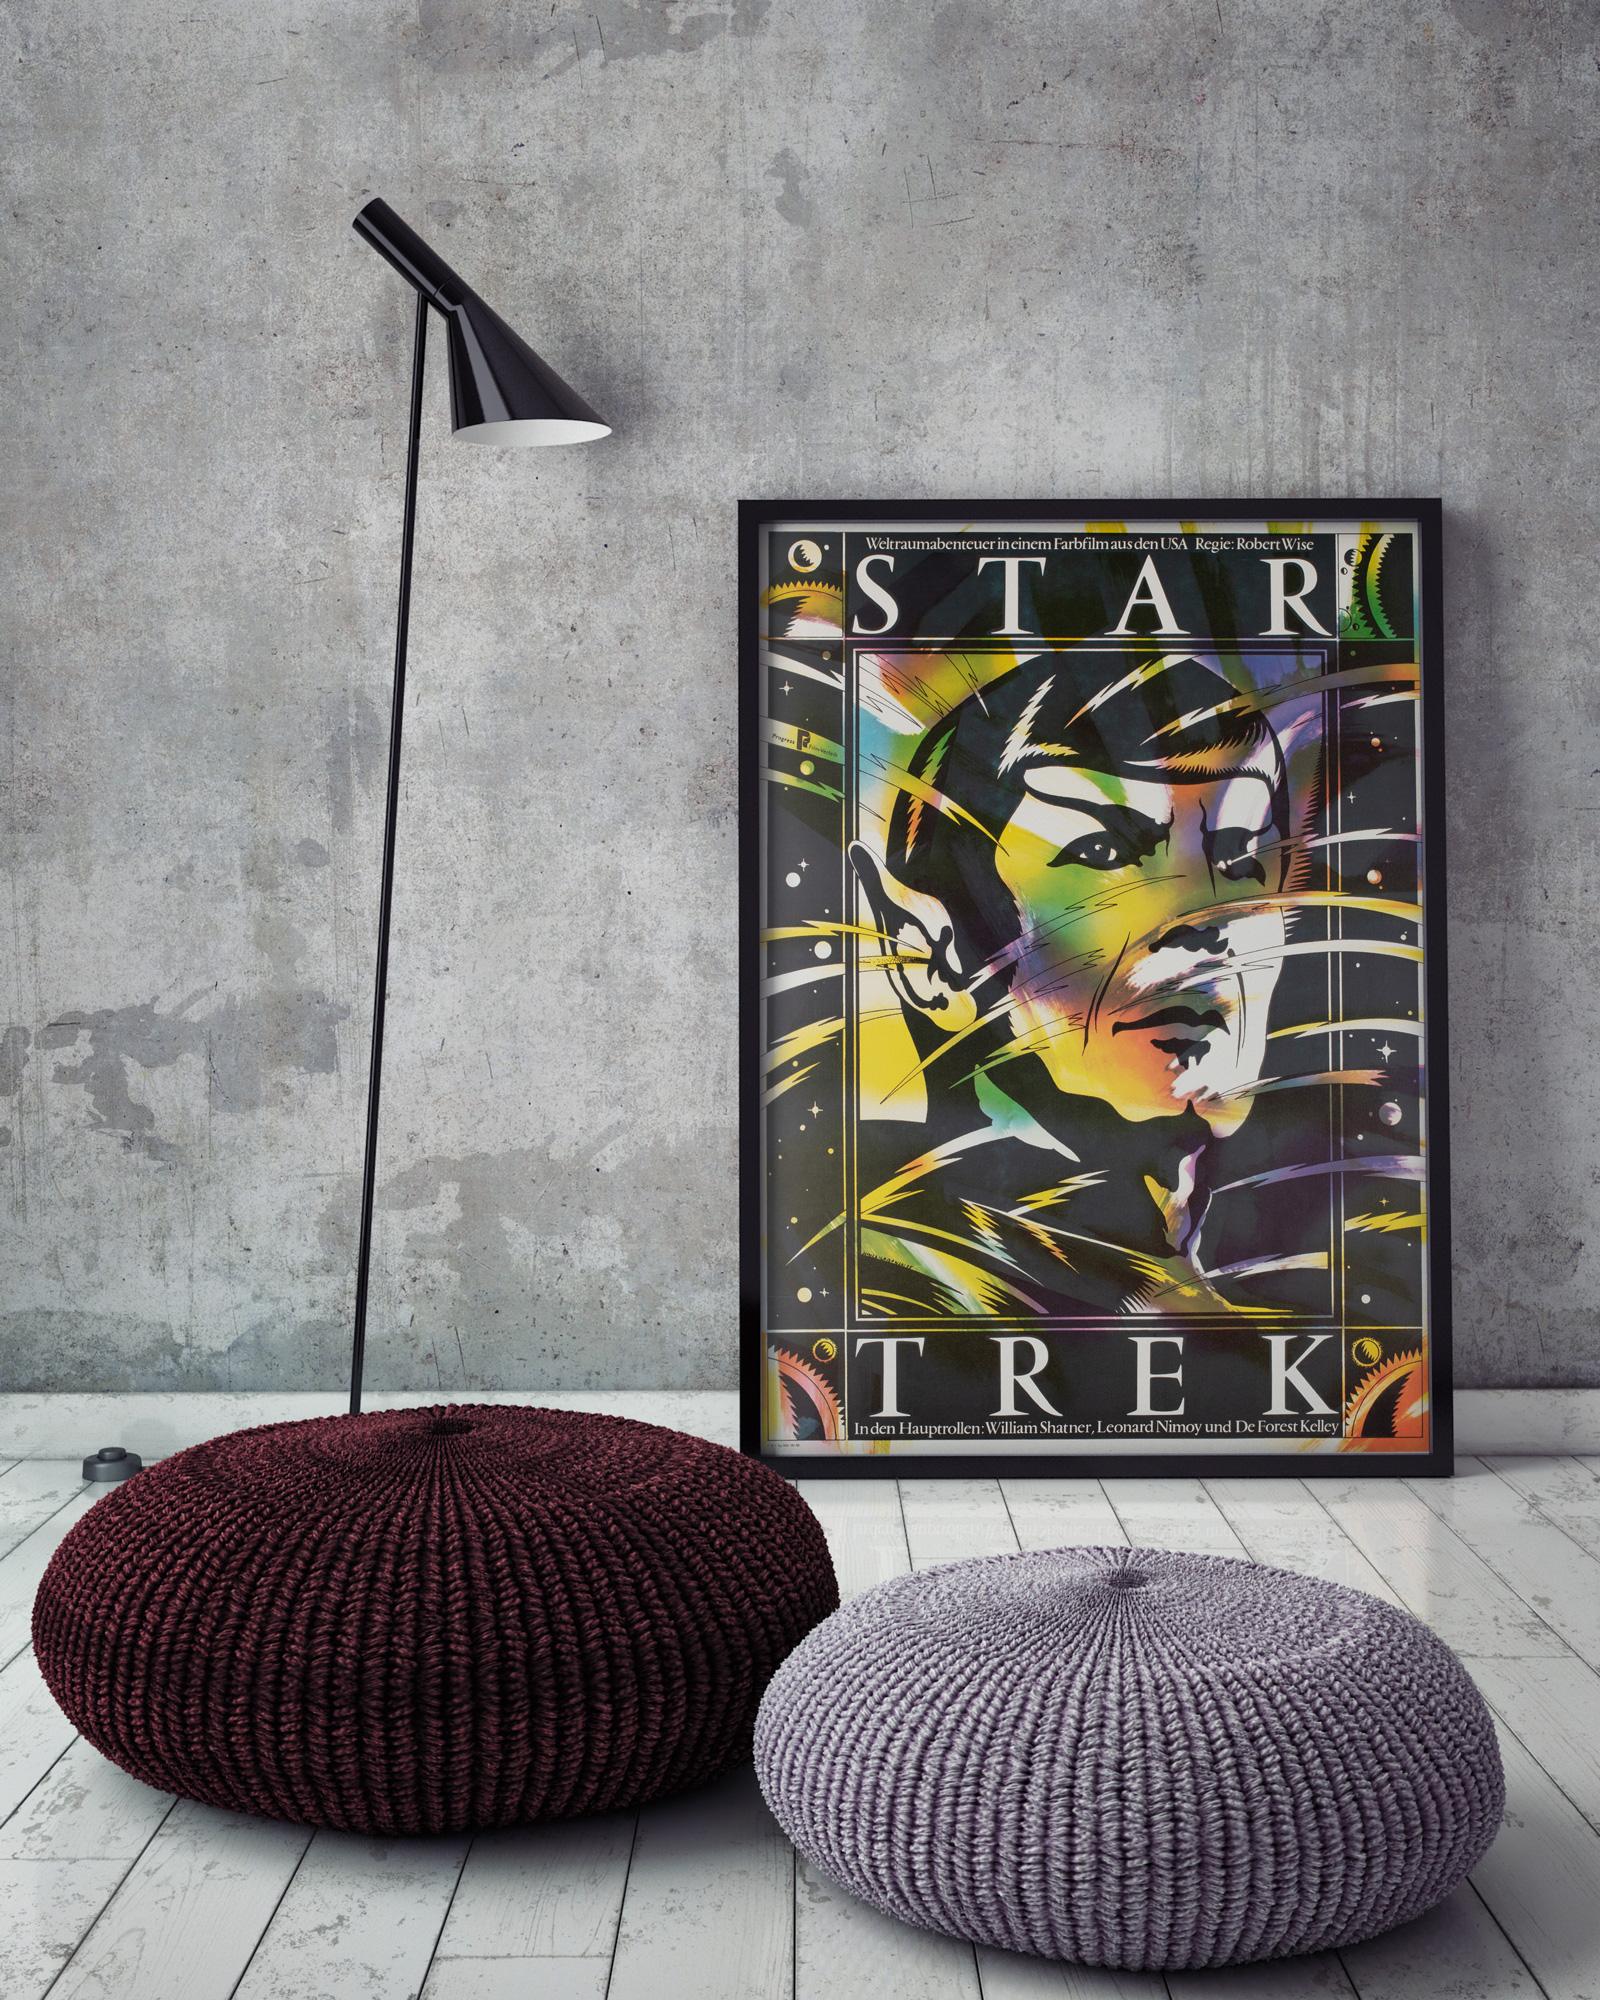 Star Trek Original East German Film Movie Poster, 1985

We love Ilabowski's Spock artwork on the East German film poster for Star Trek. A great, rare item especially in this larger size and in rolled condition! 

This original vintage movie